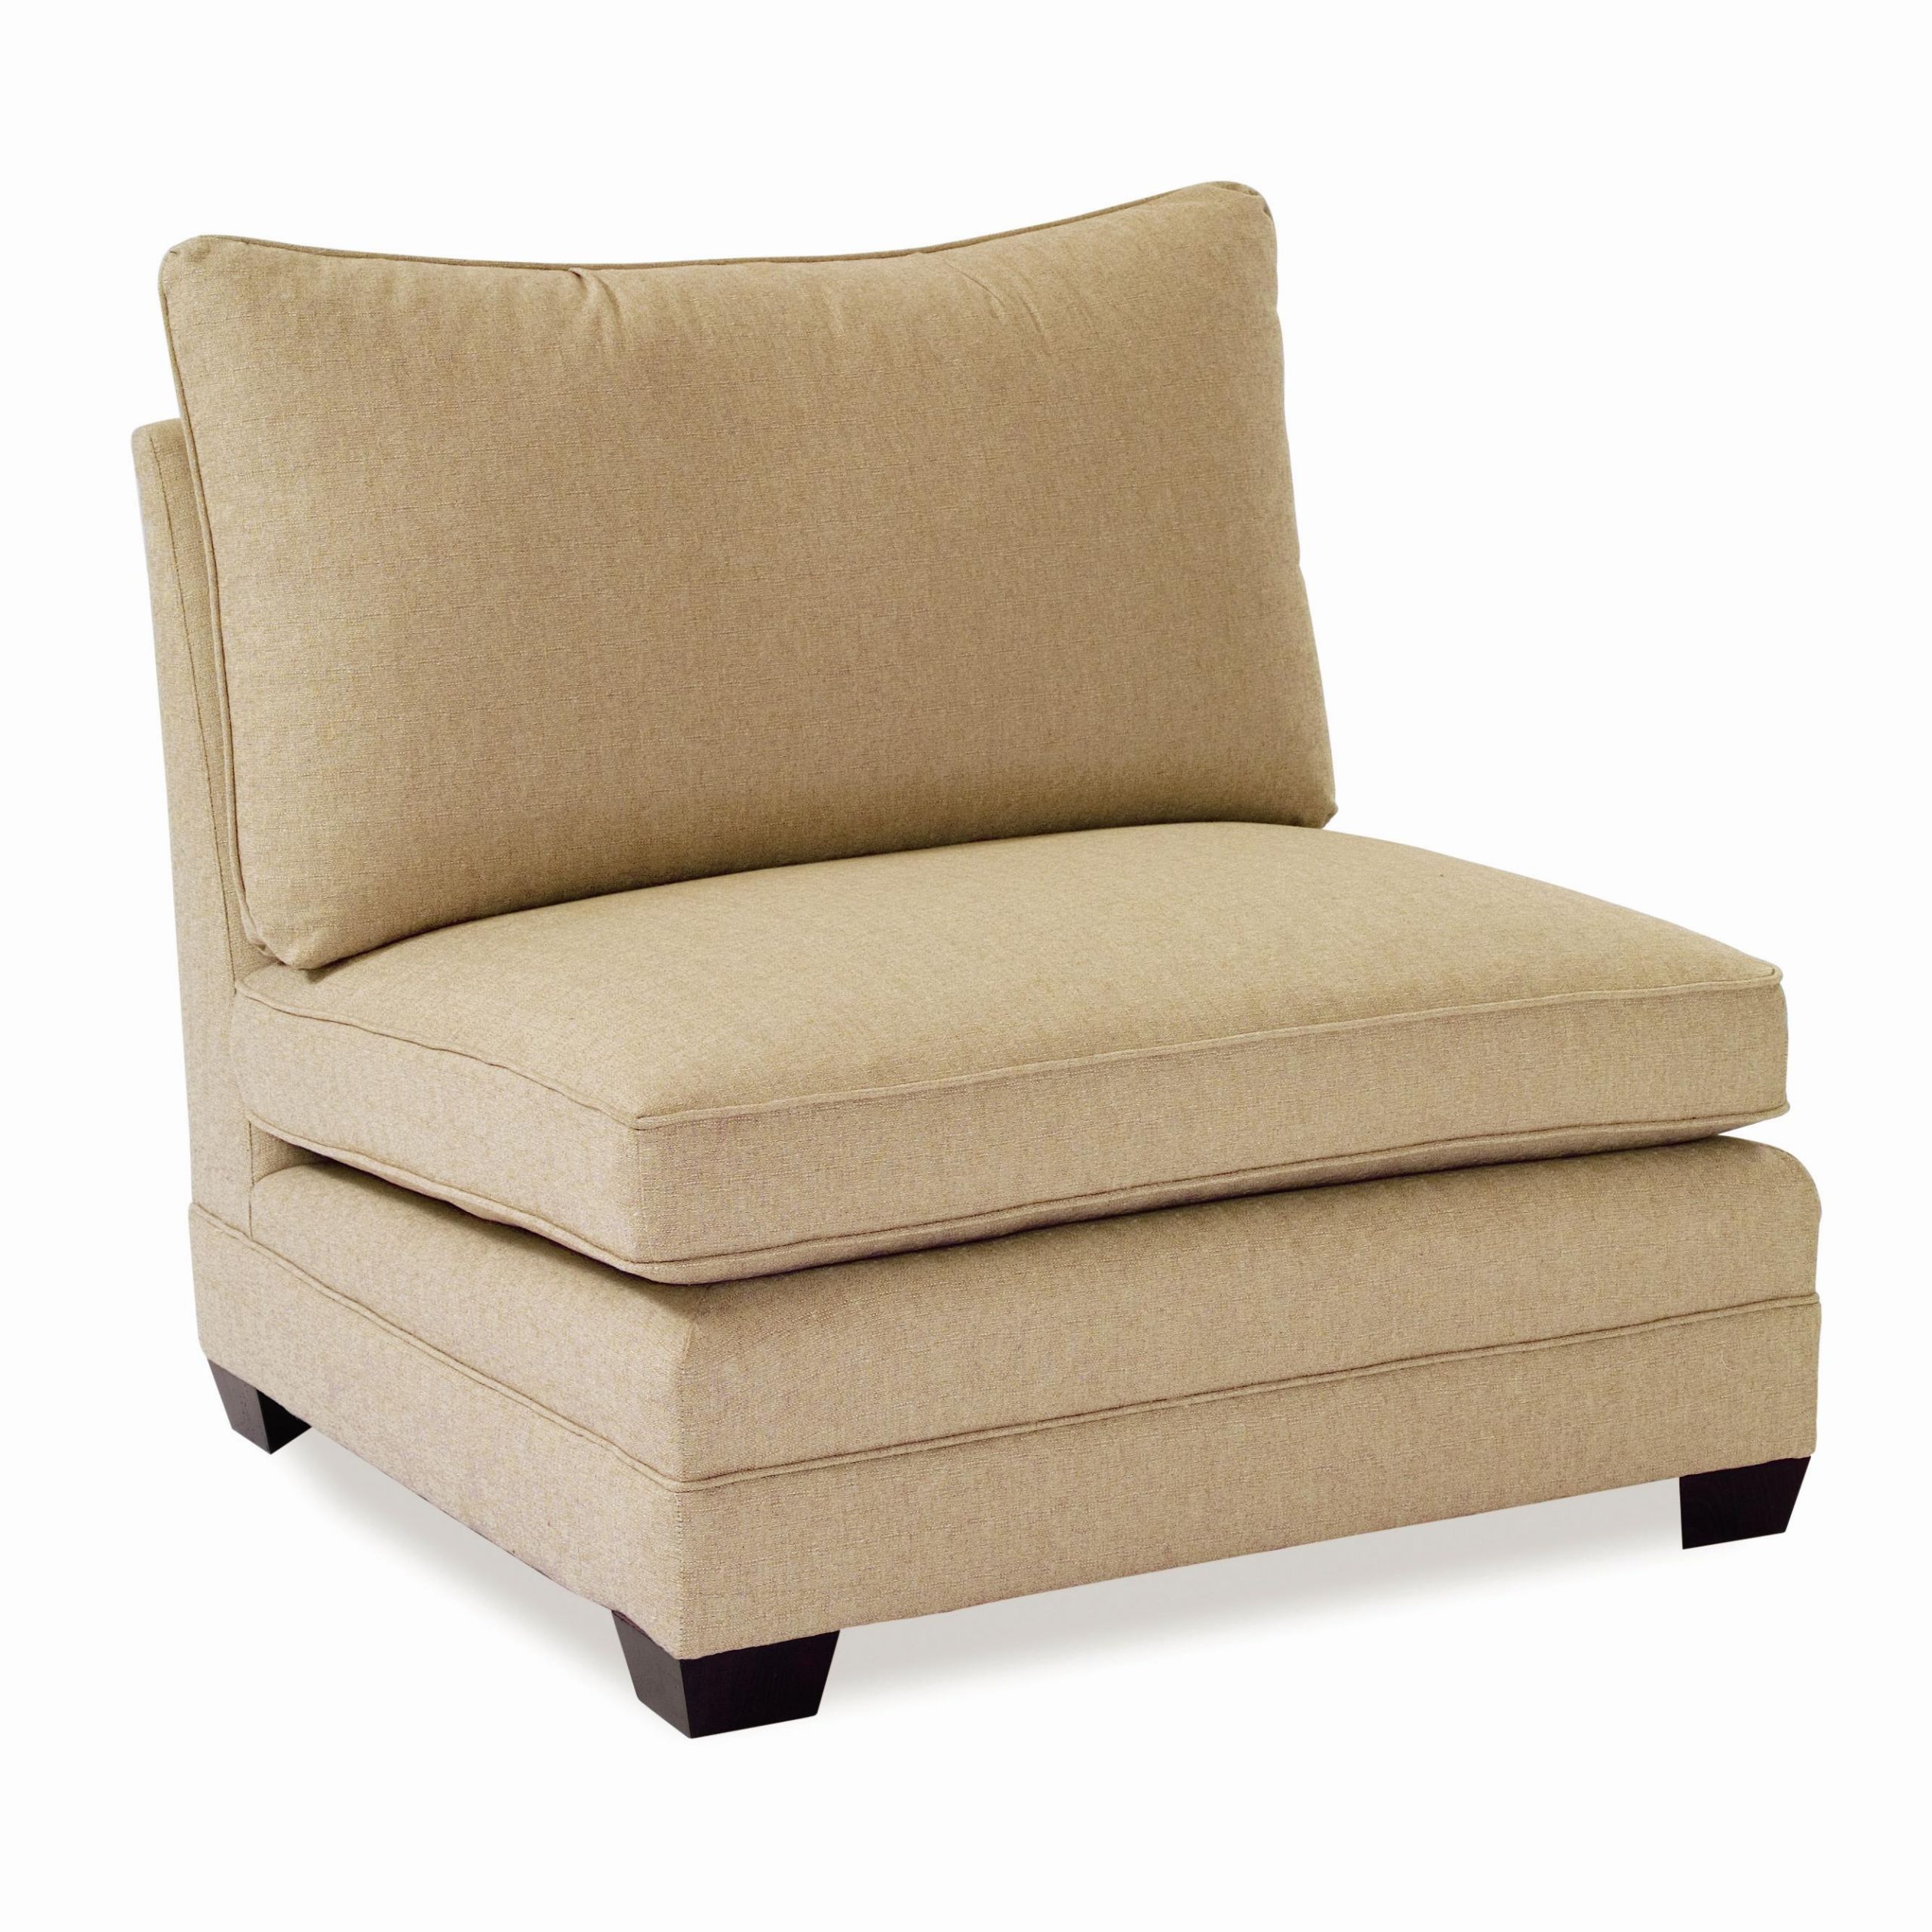 Wide Living Room Chair
 Sam Moore Margo 1470 Armless Chair